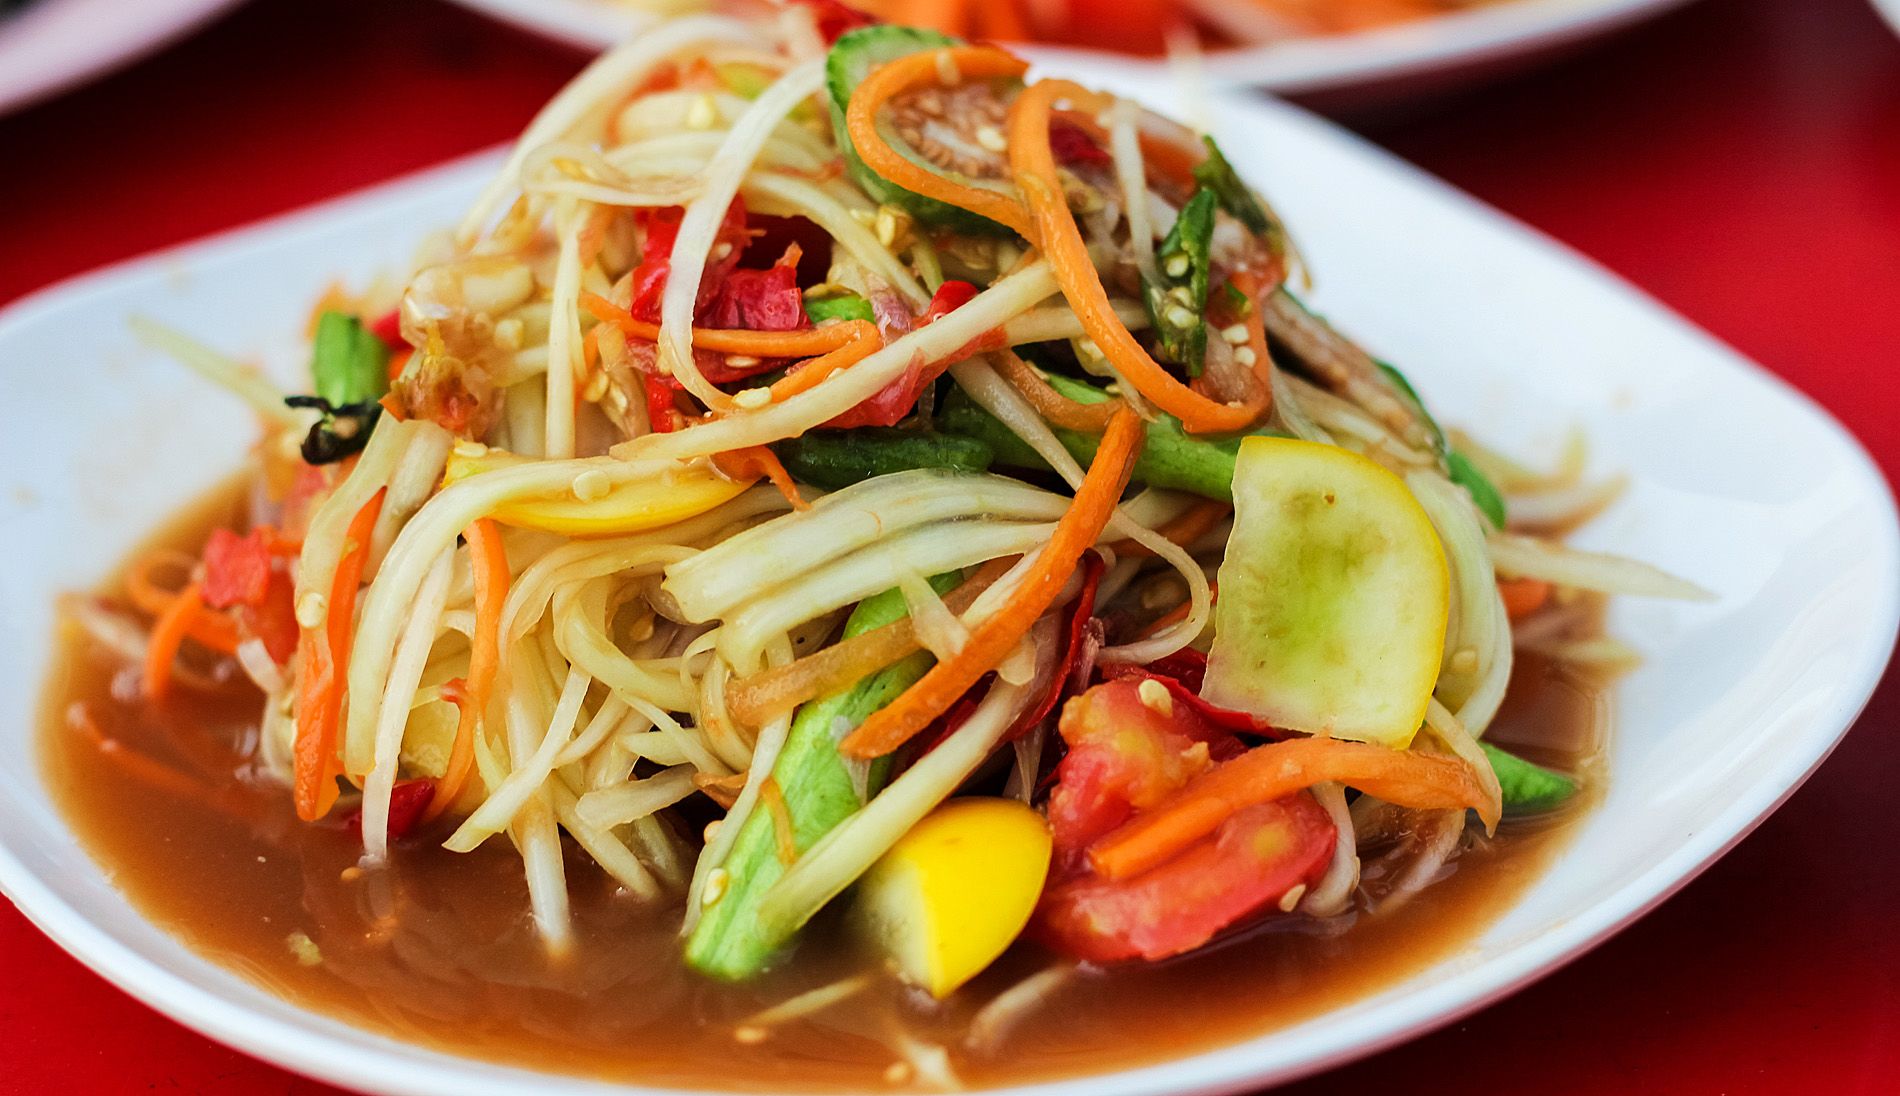 40 Thai foods we can't live without